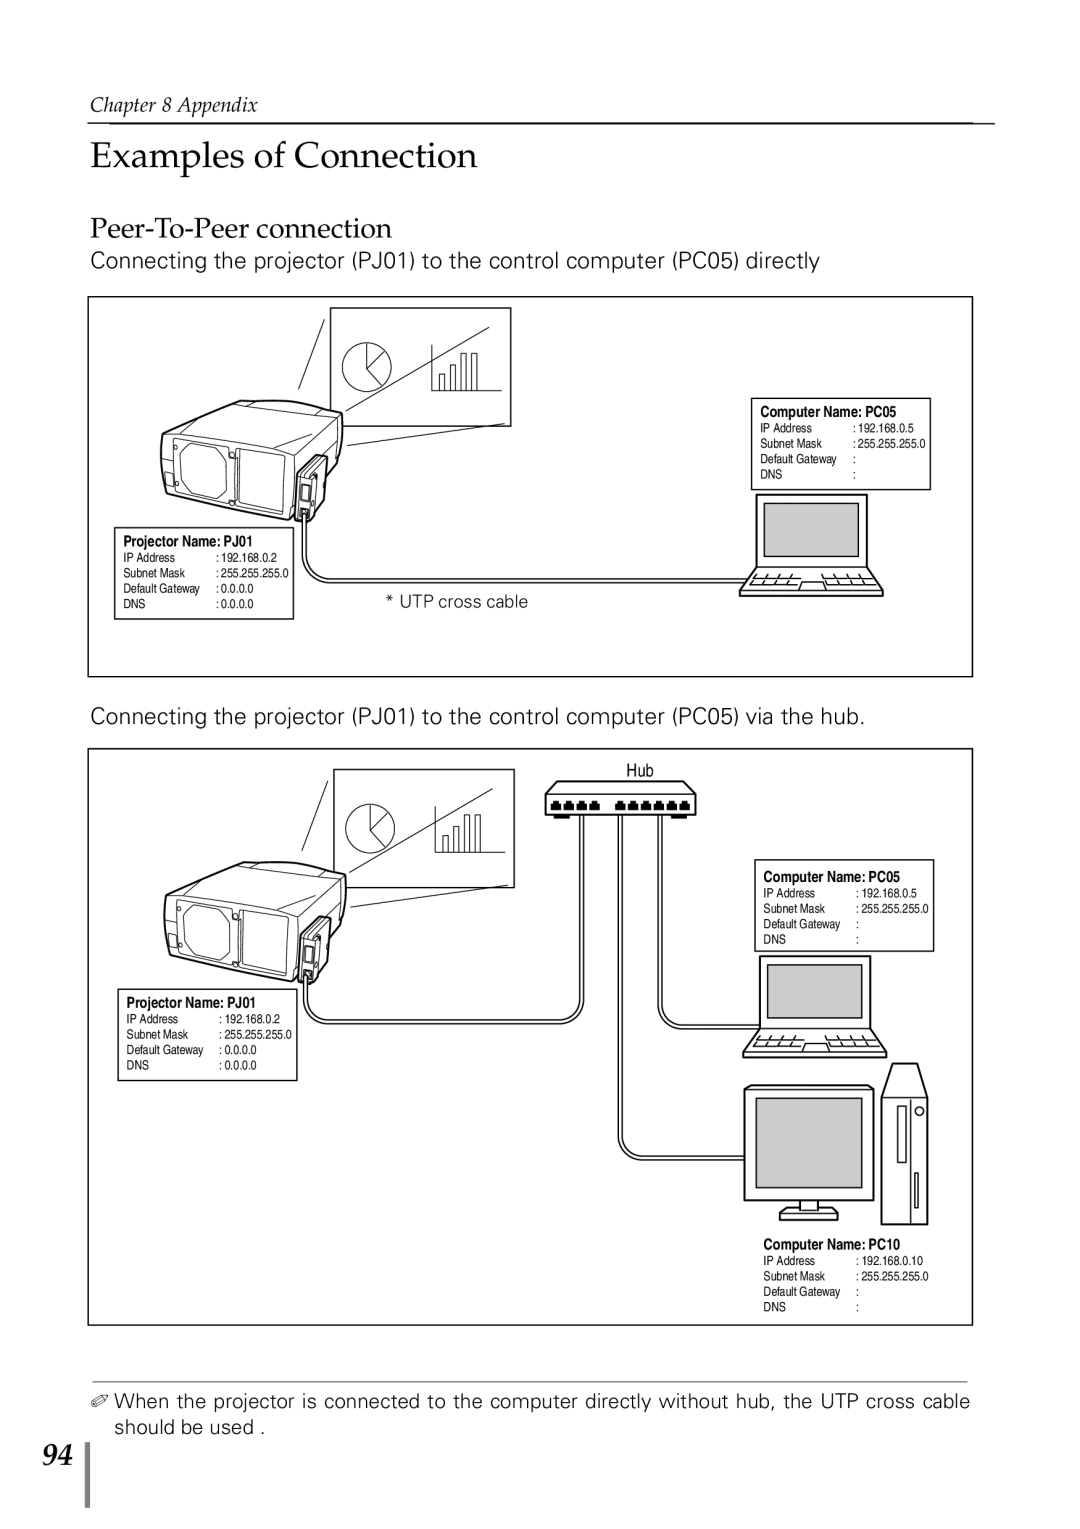 Eiki PjNET-20 owner manual Examples of Connection, Peer-To-Peer connection, Appendix, UTP cross cable, Computer Name PC05 